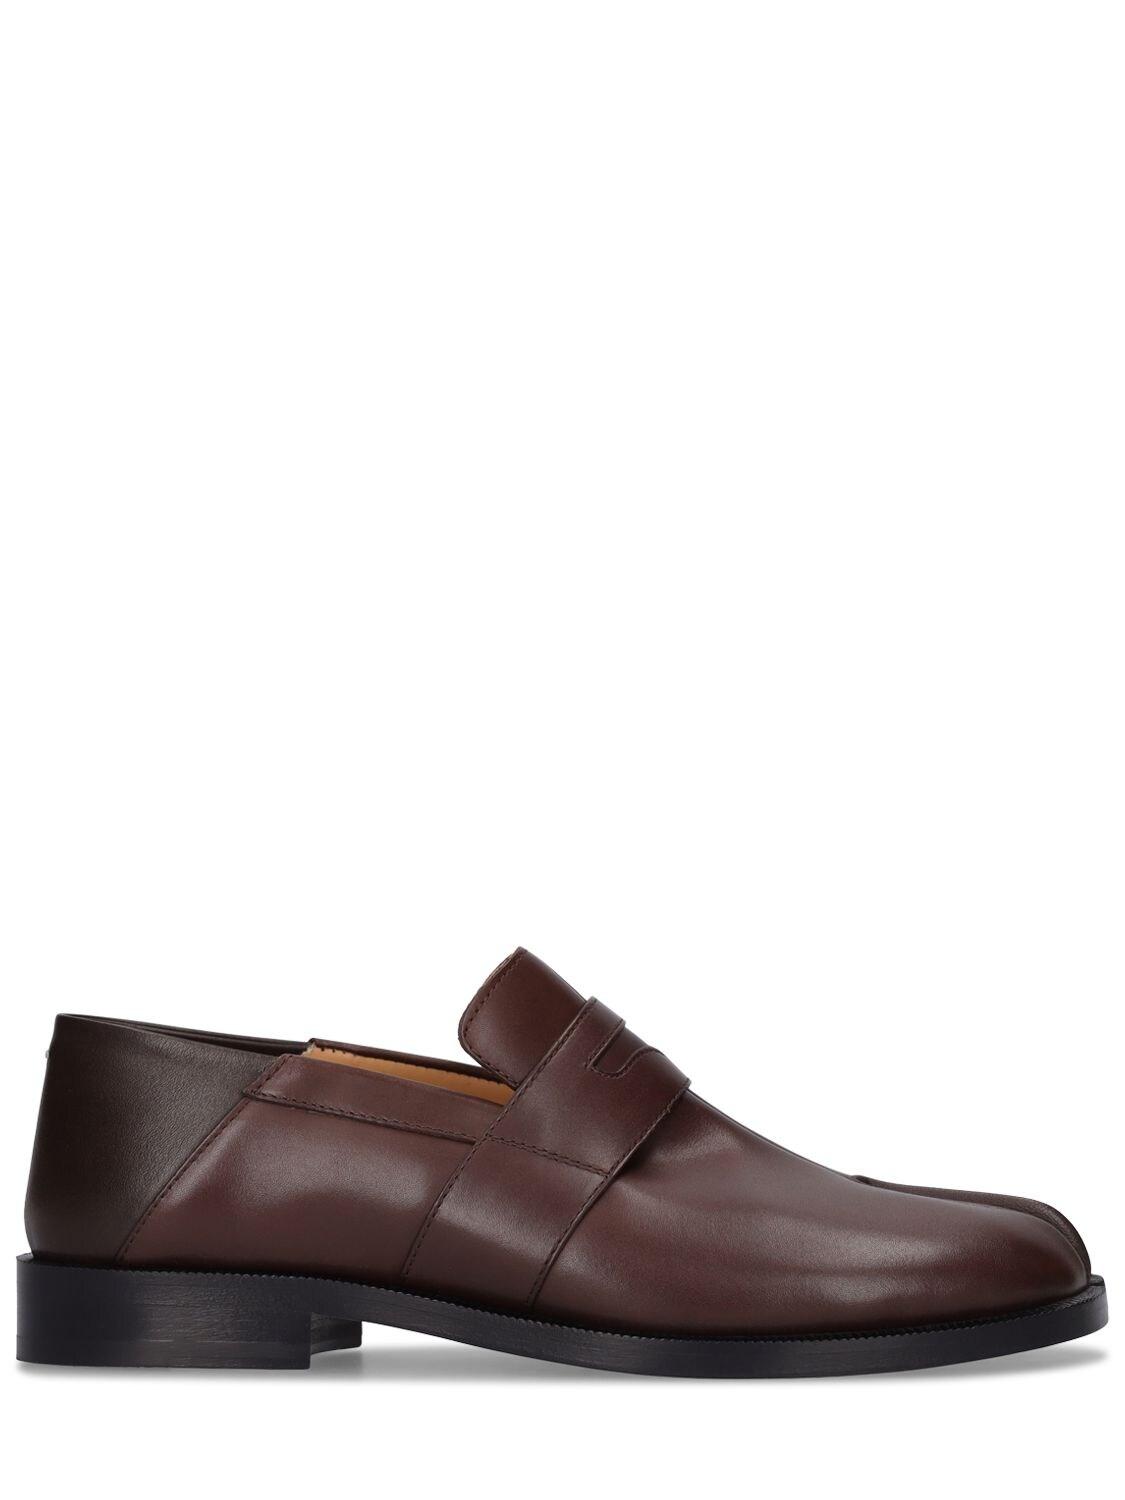 Maison Margiela 20mm Tabi Leather Loafers in Brown | Lyst Canada